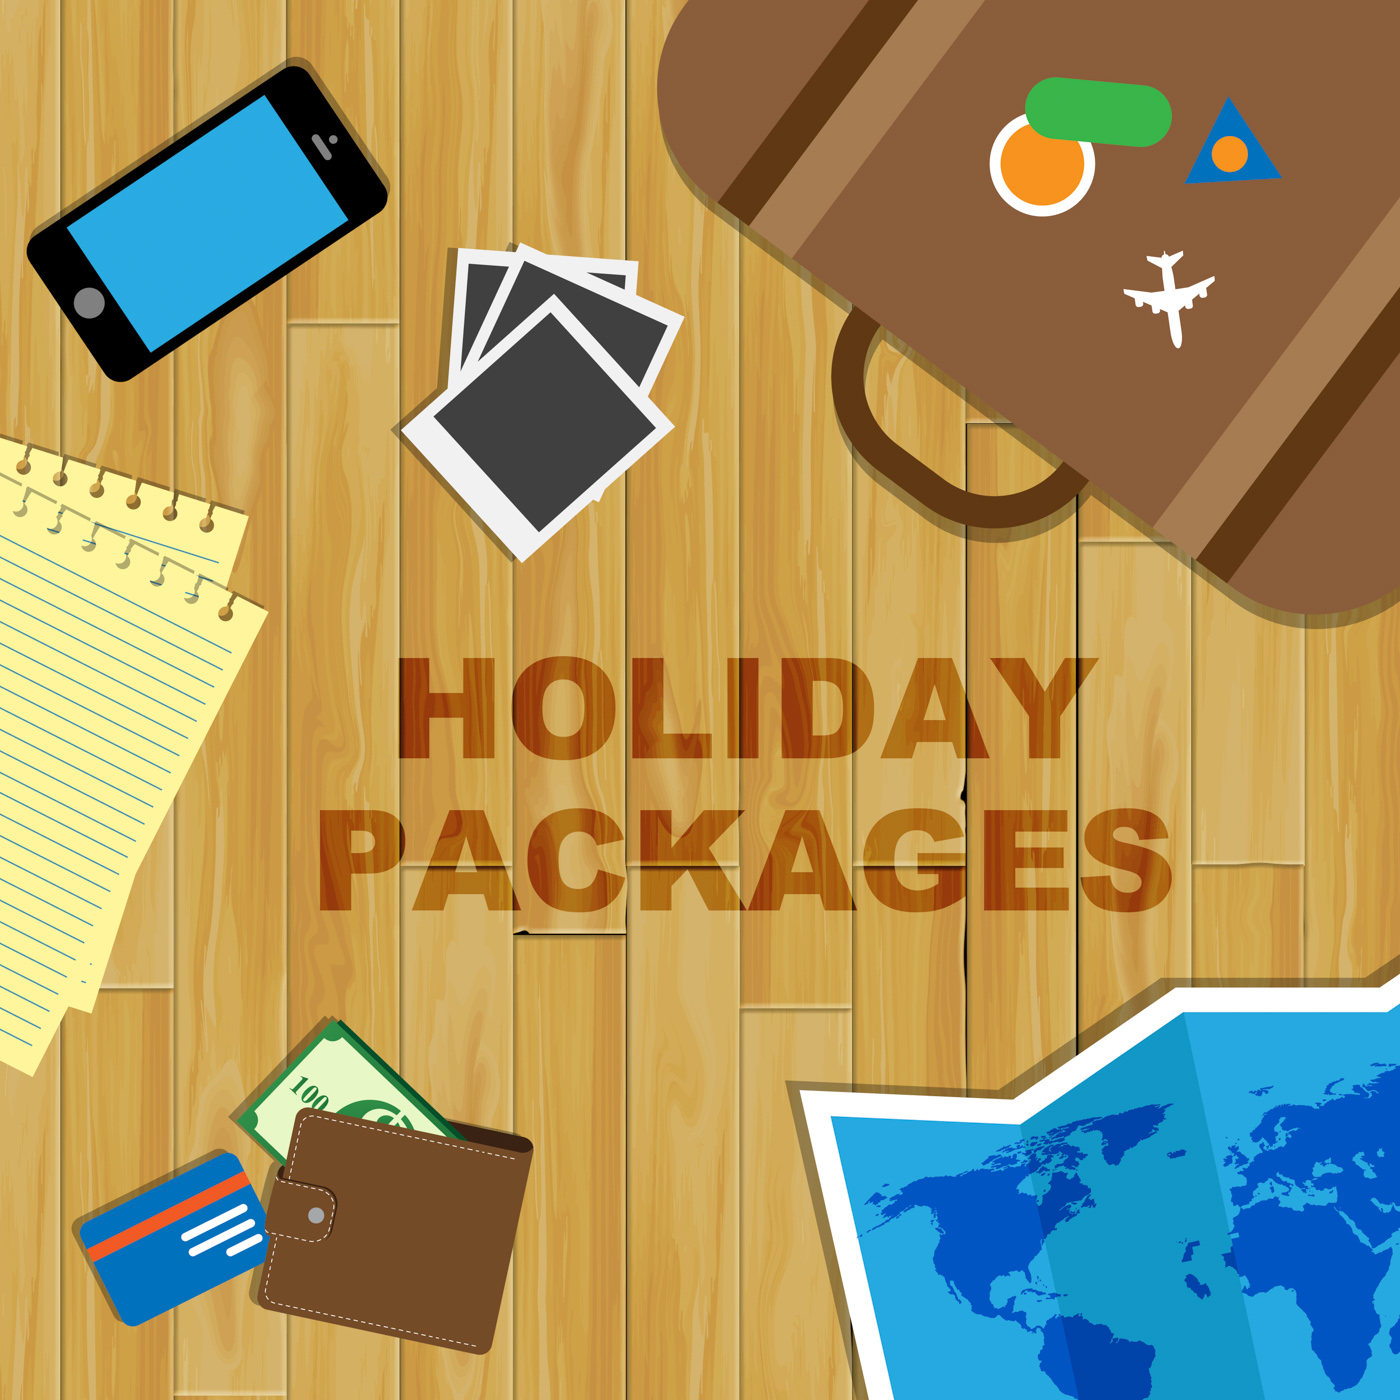 Holiday packages means organised trip and holidays photo